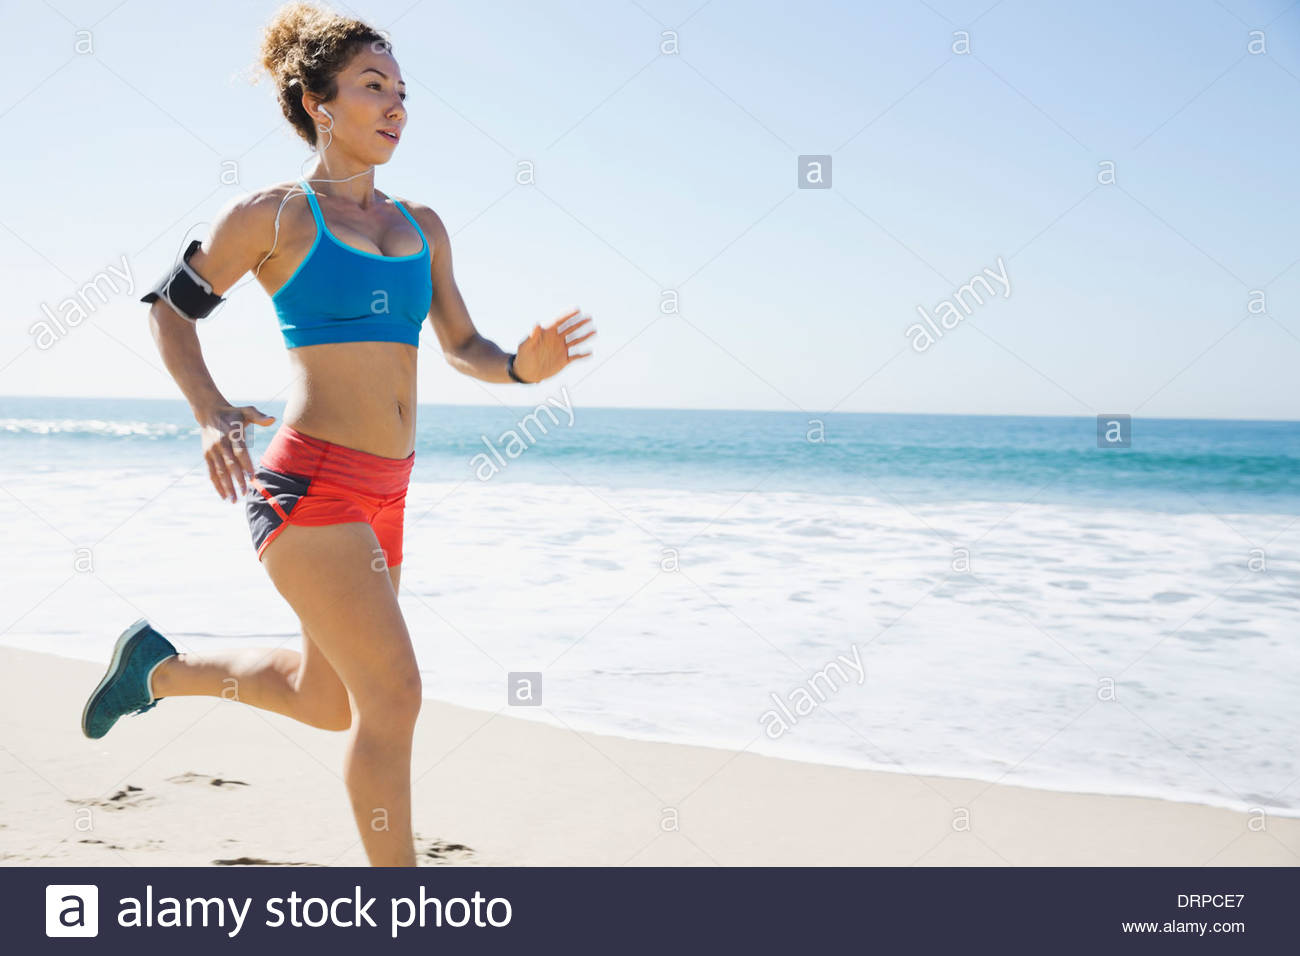 Determined jogger listening to music at beach Stock Photo